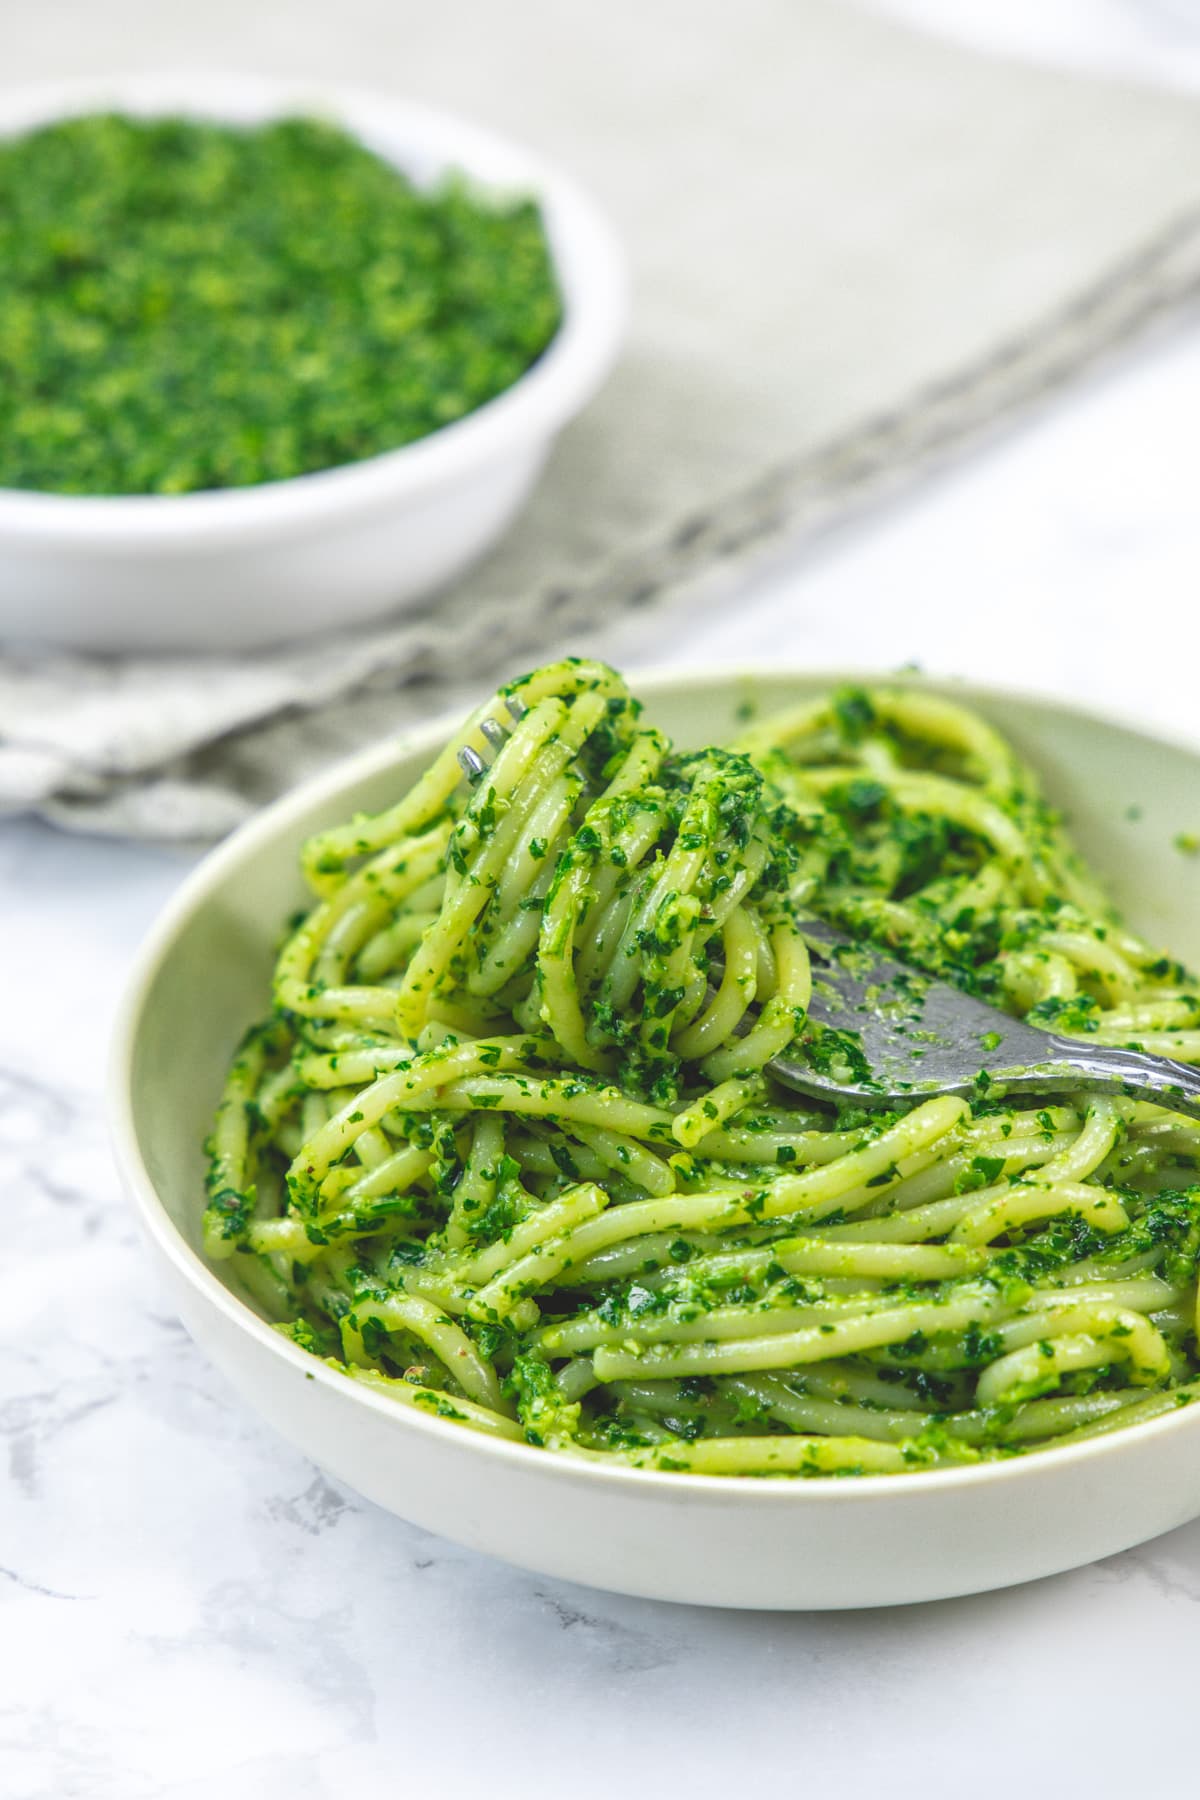 Pesto spaghetti pasta taking with a fork and parsley pesto bowl in the back.